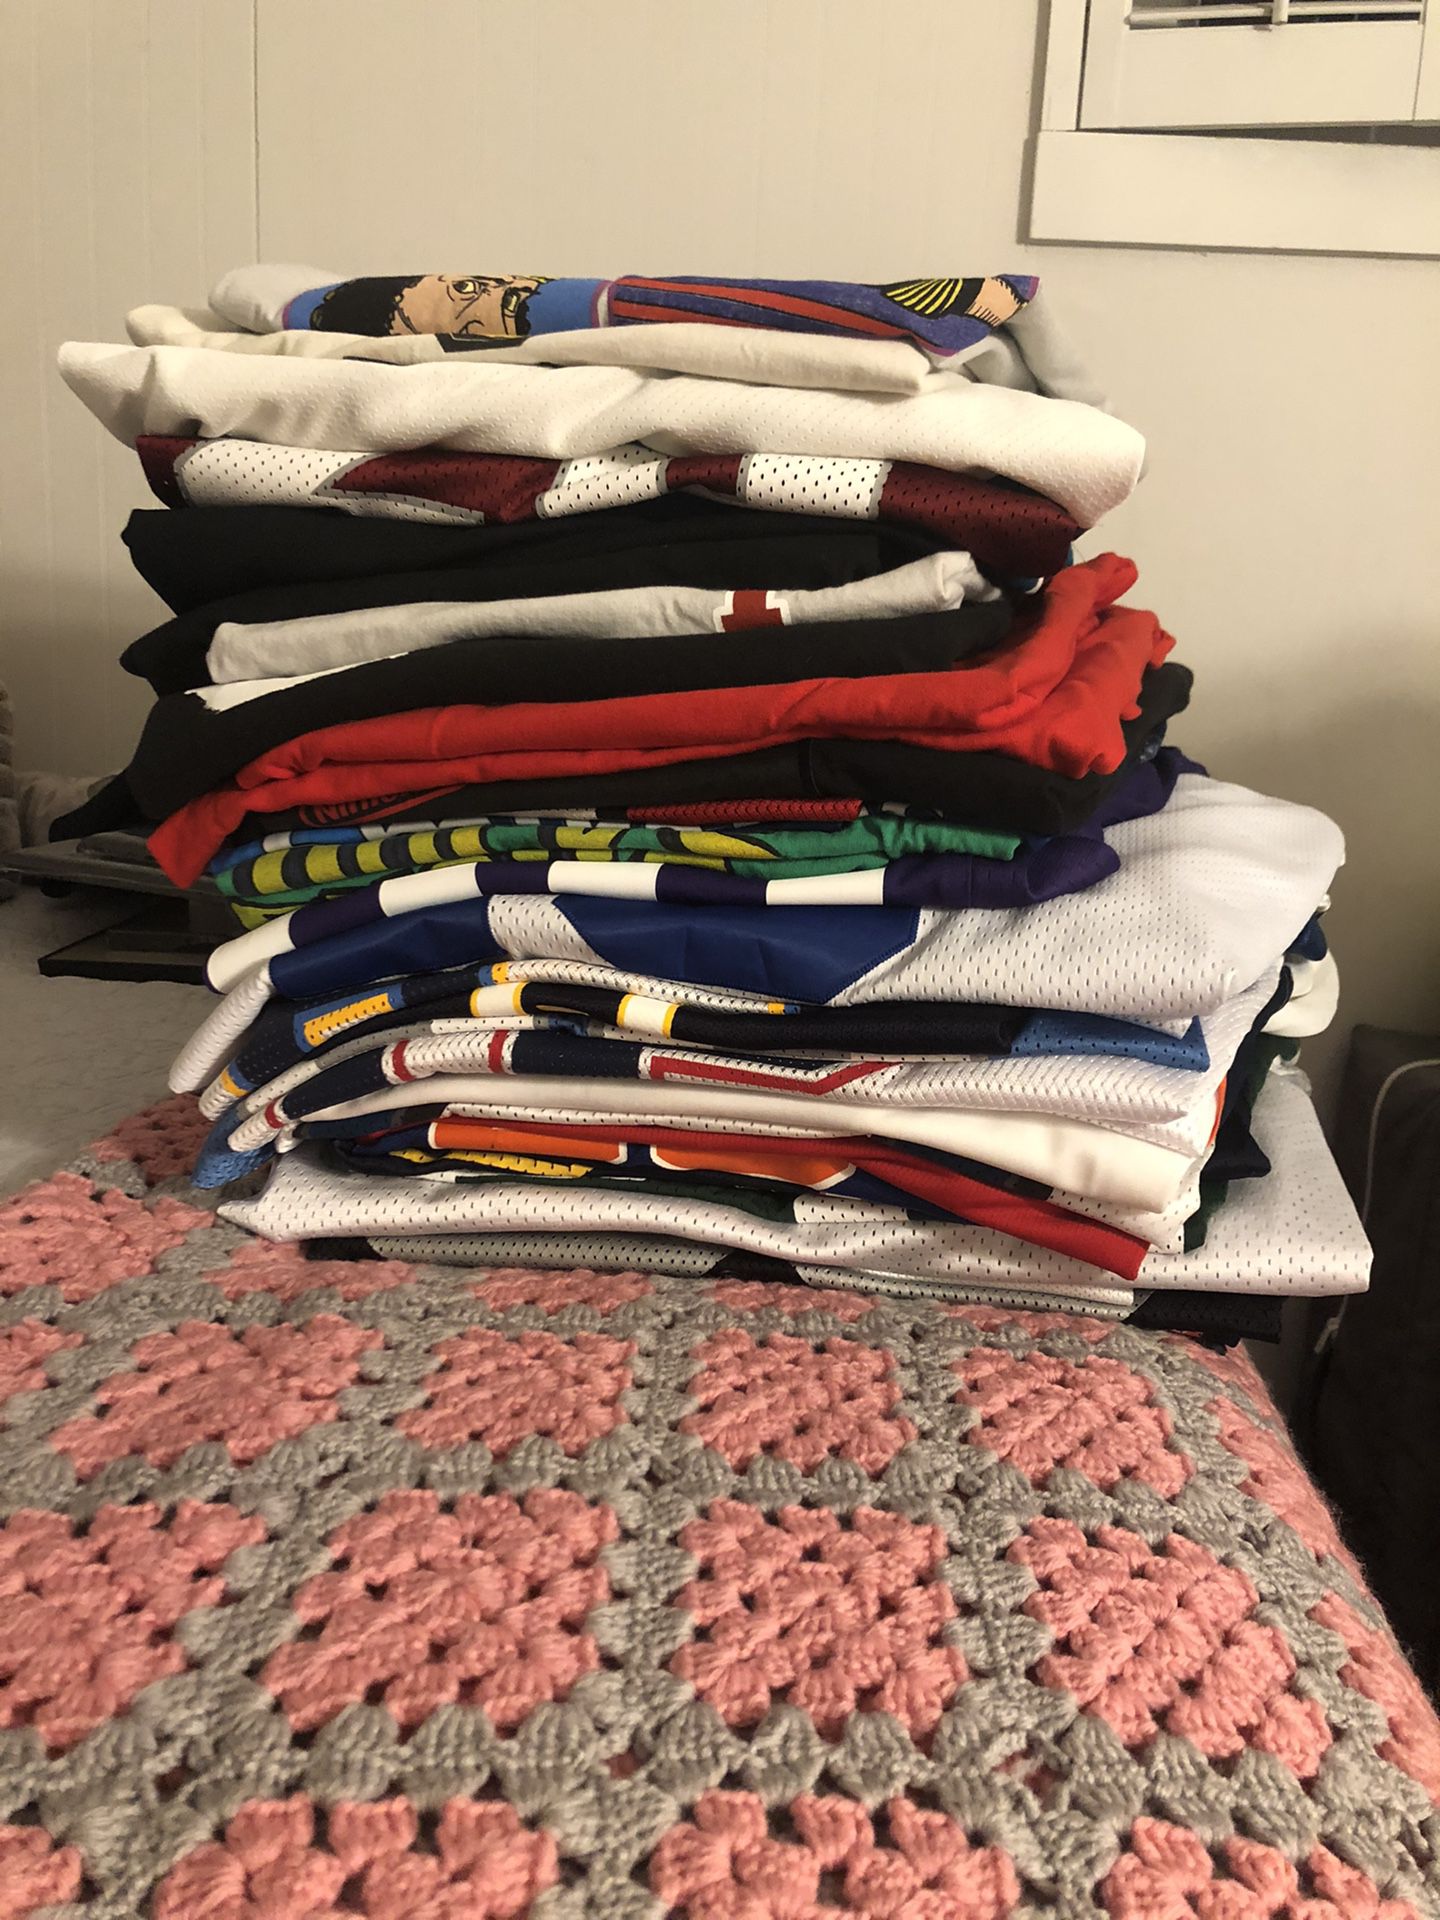 Entire stack of jerseys